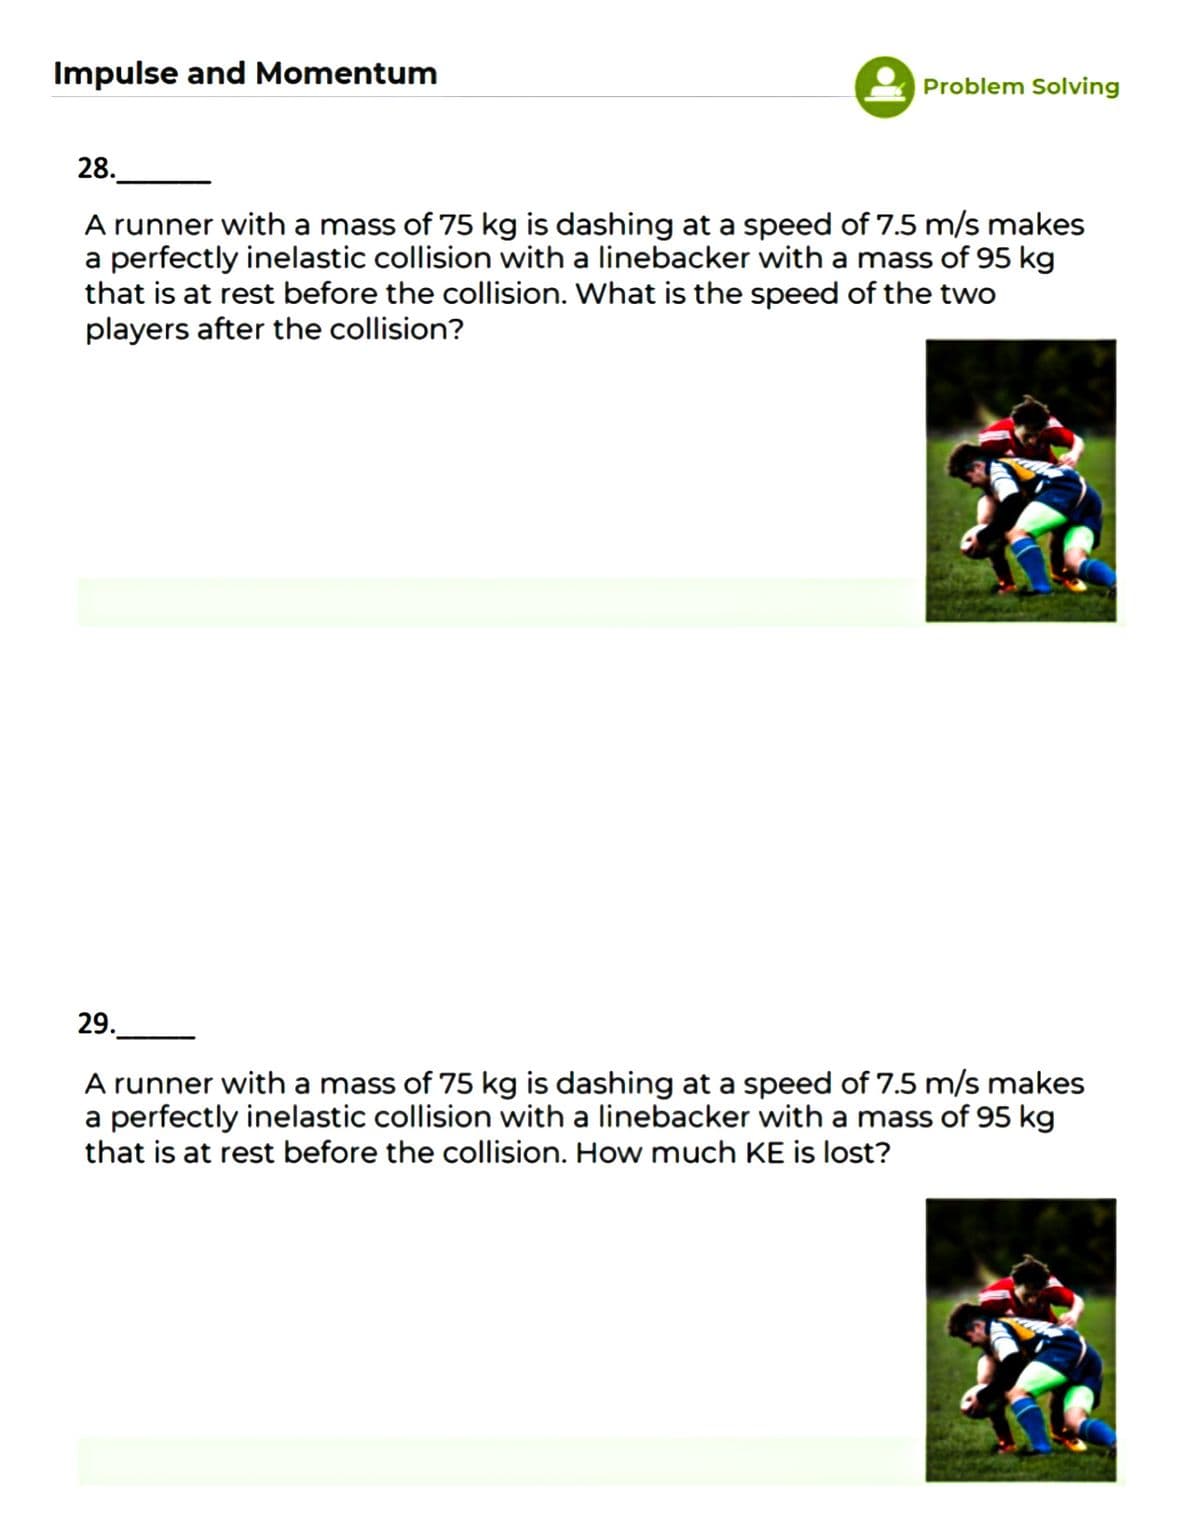 Impulse and Momentum
Problem Solving
28.
A runner with a mass of 75 kg is dashing at a speed of 7.5 m/s makes
a perfectly inelastic collision with a linebacker with a mass of 95 kg
that is at rest before the collision. What is the speed of the two
players after the collision?
29.
A runner with a mass of 75 kg is dashing at a speed of 7.5 m/s makes
a perfectly inelastic collision with a linebacker with a mass of 95 kg
that is at rest before the collision. How much KE is lost?
